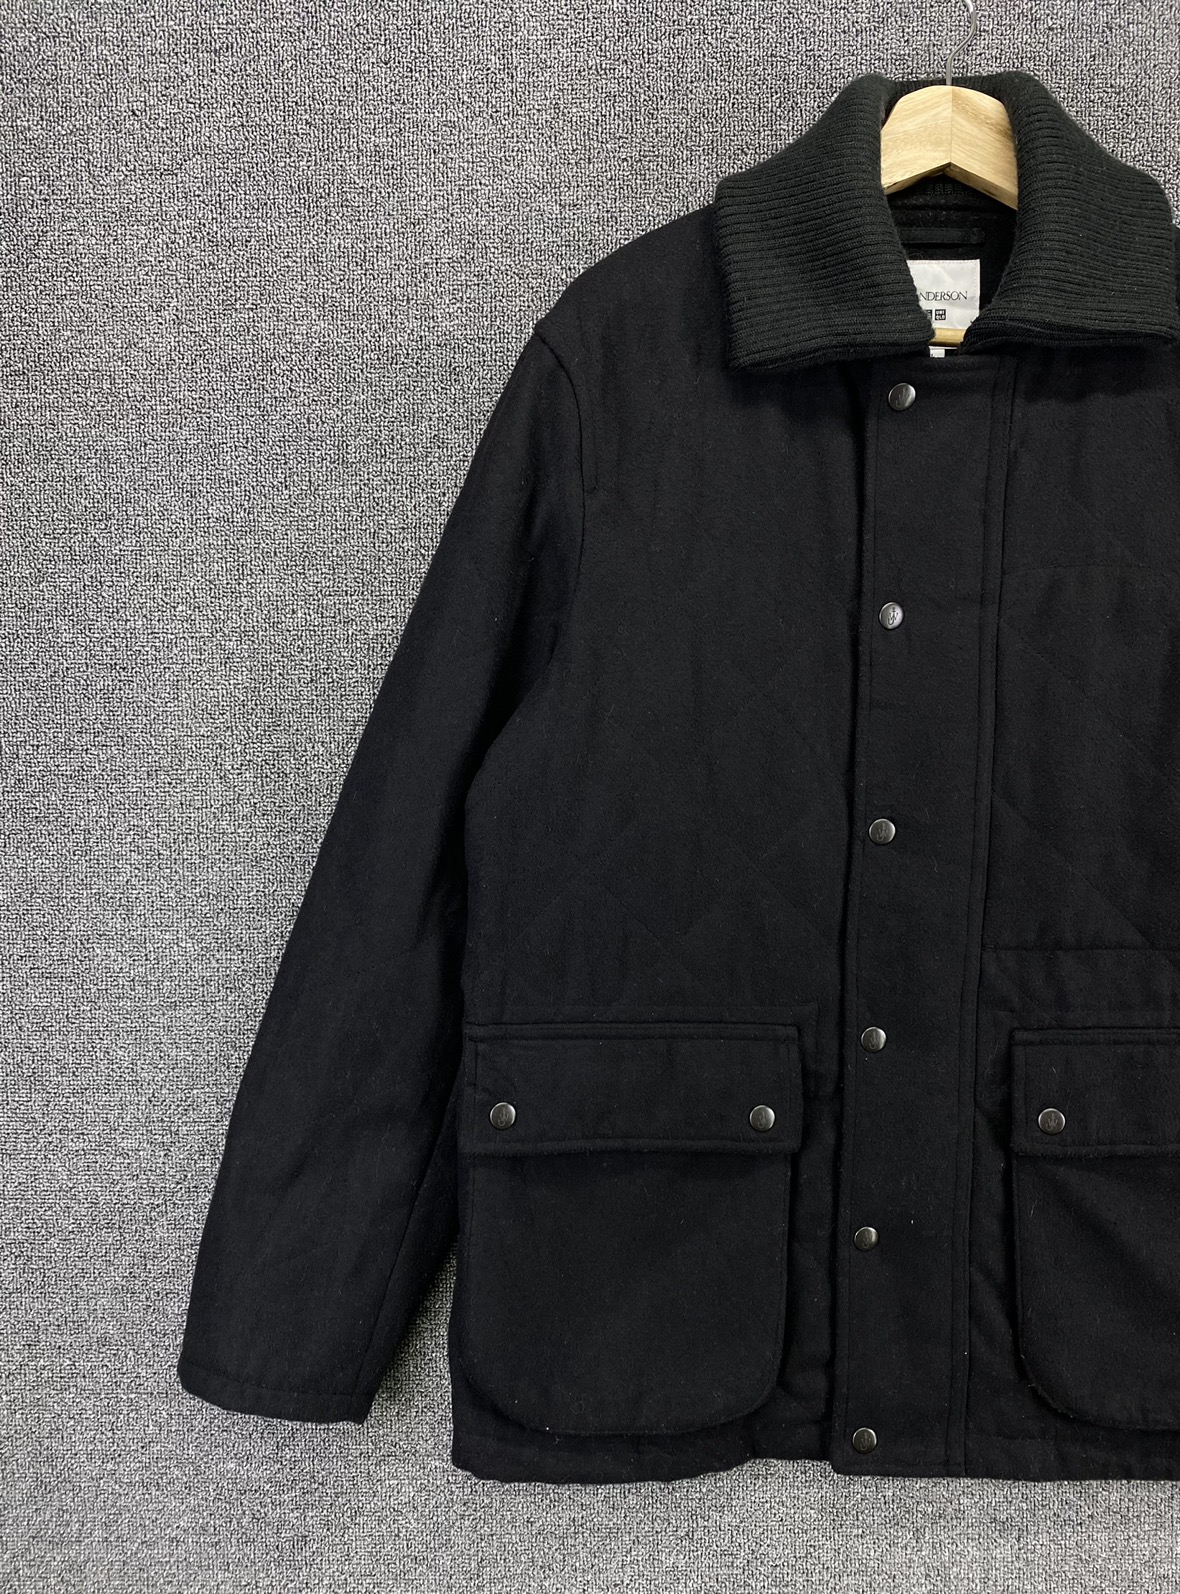 Uniqlo - J. W. Anderson x Uniqlo Double Pocket Quilted Wool Jacket - 3